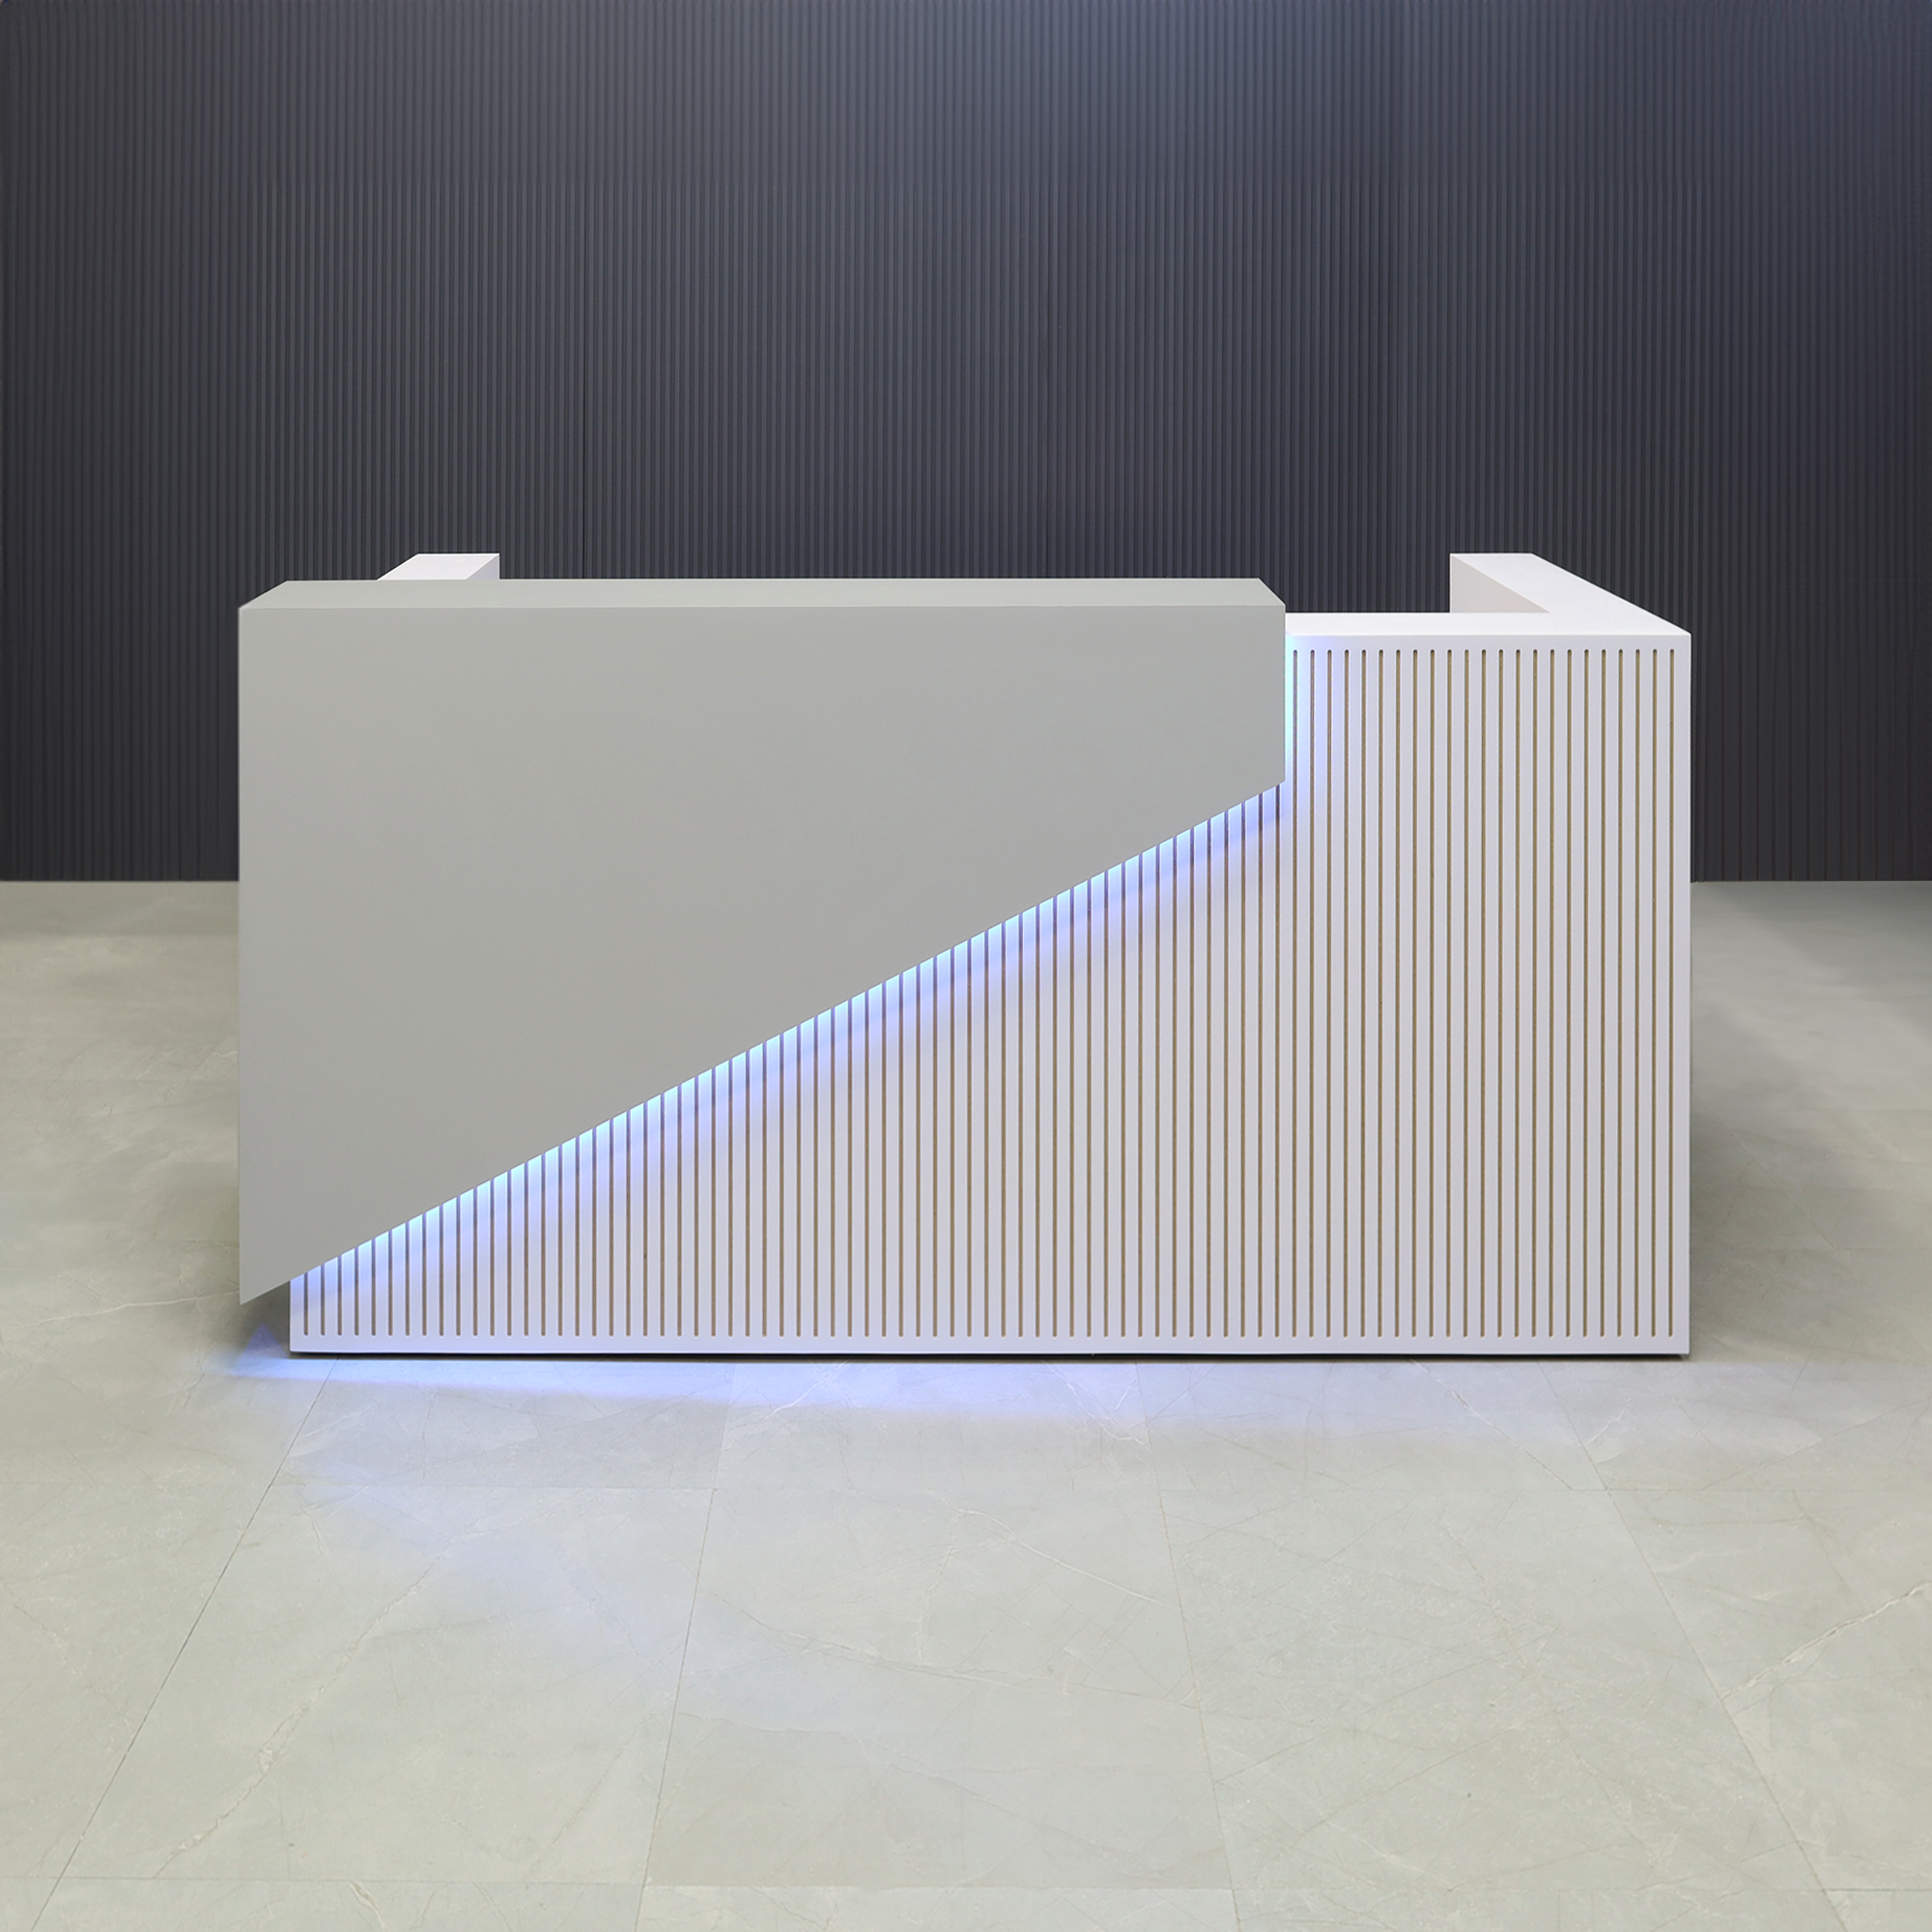 Miami Custom Reception Desk in fog gray laminate counter, white gloss laminate  grooved front panel and desk, with color LED shown here.